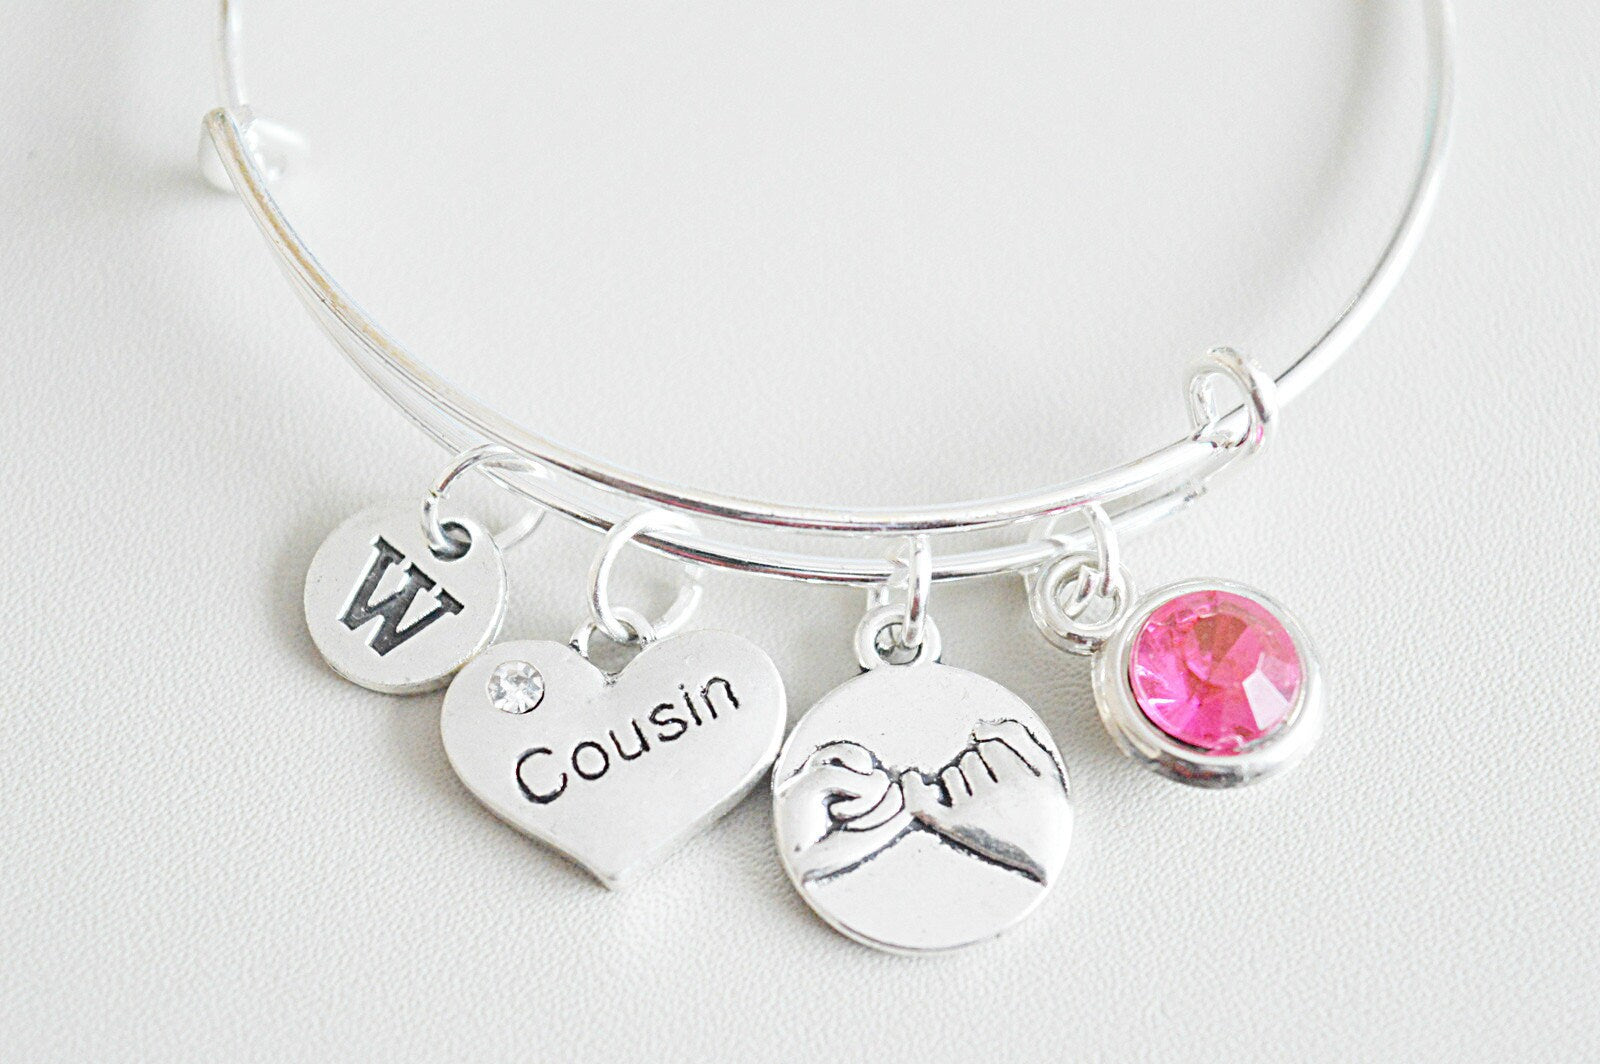 Cousin bracelet, Cousin Gifts, Gift for Cousin, Cousin Charm, Cousin Christmas Gift, Cousin Birthday Gift, Cousin Jewelry, Cousin Charm